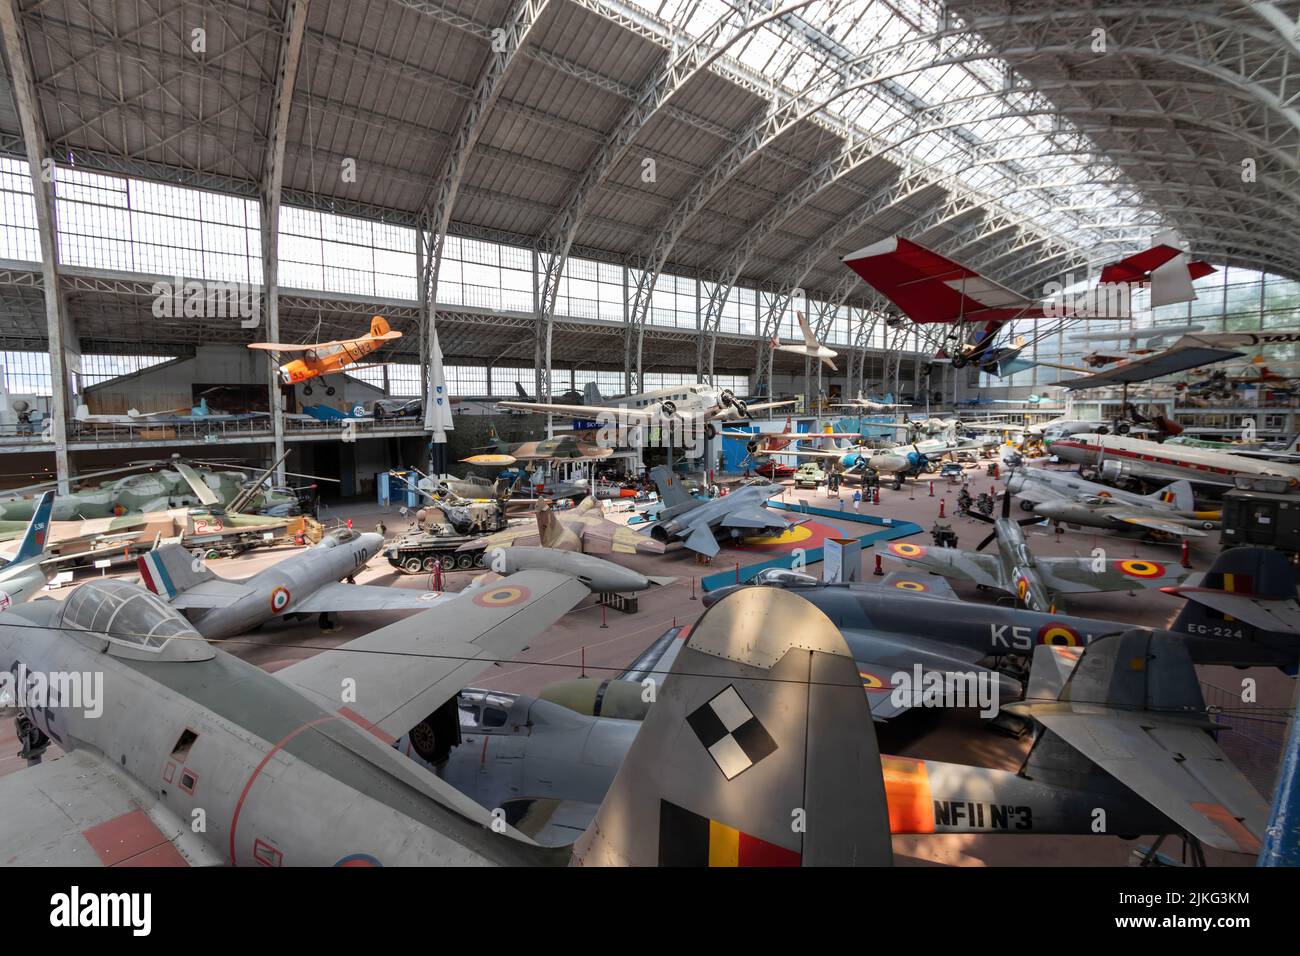 Brussels, Belgium - July 17, 2018: The aviation hall of the Royal Museum of the Armed Forces and Military History Stock Photo